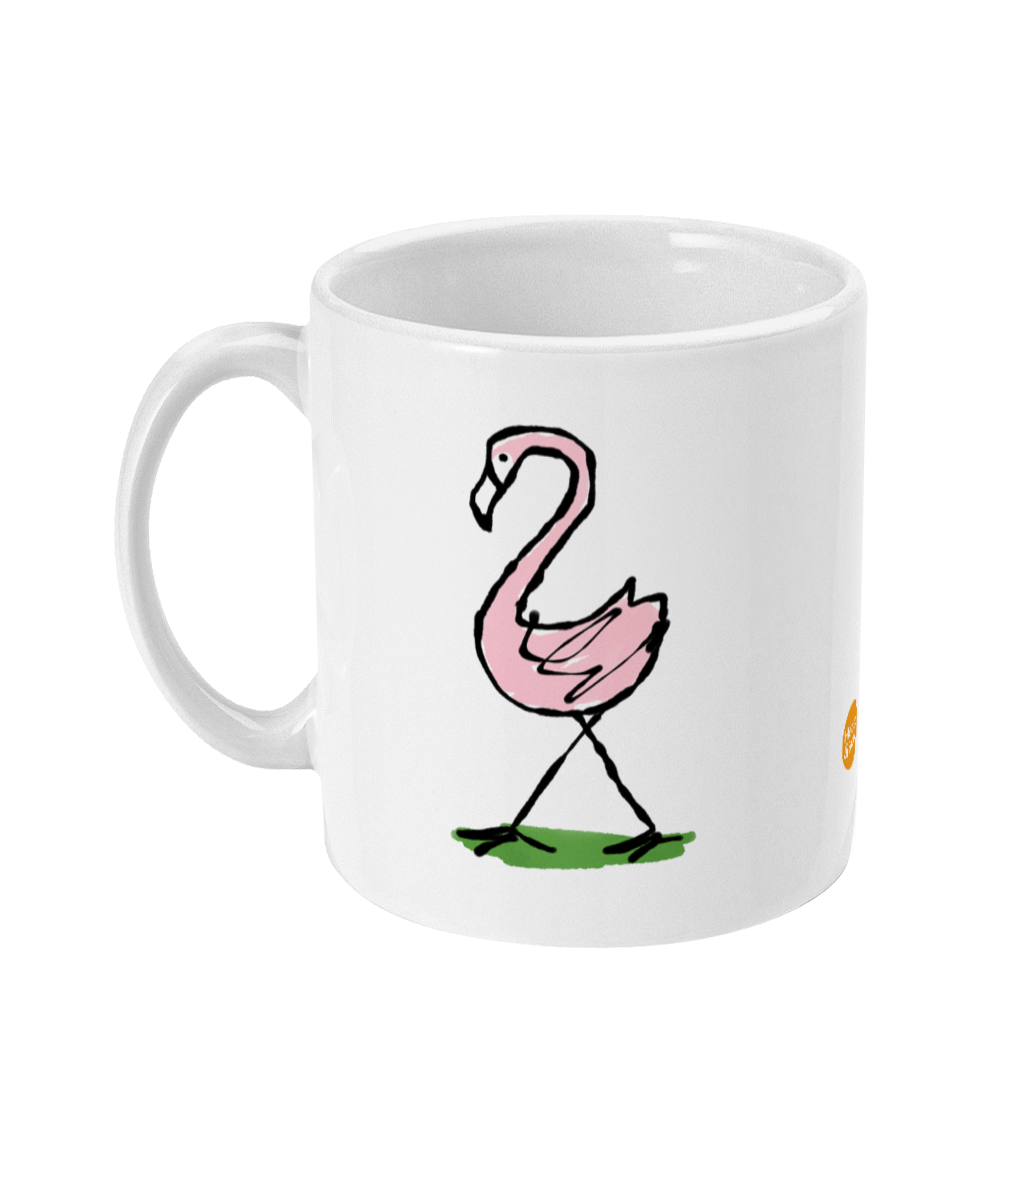 Pink Flamingo Mug - Funny cute owl illustrated coffee mug by Hector and Bone Left View